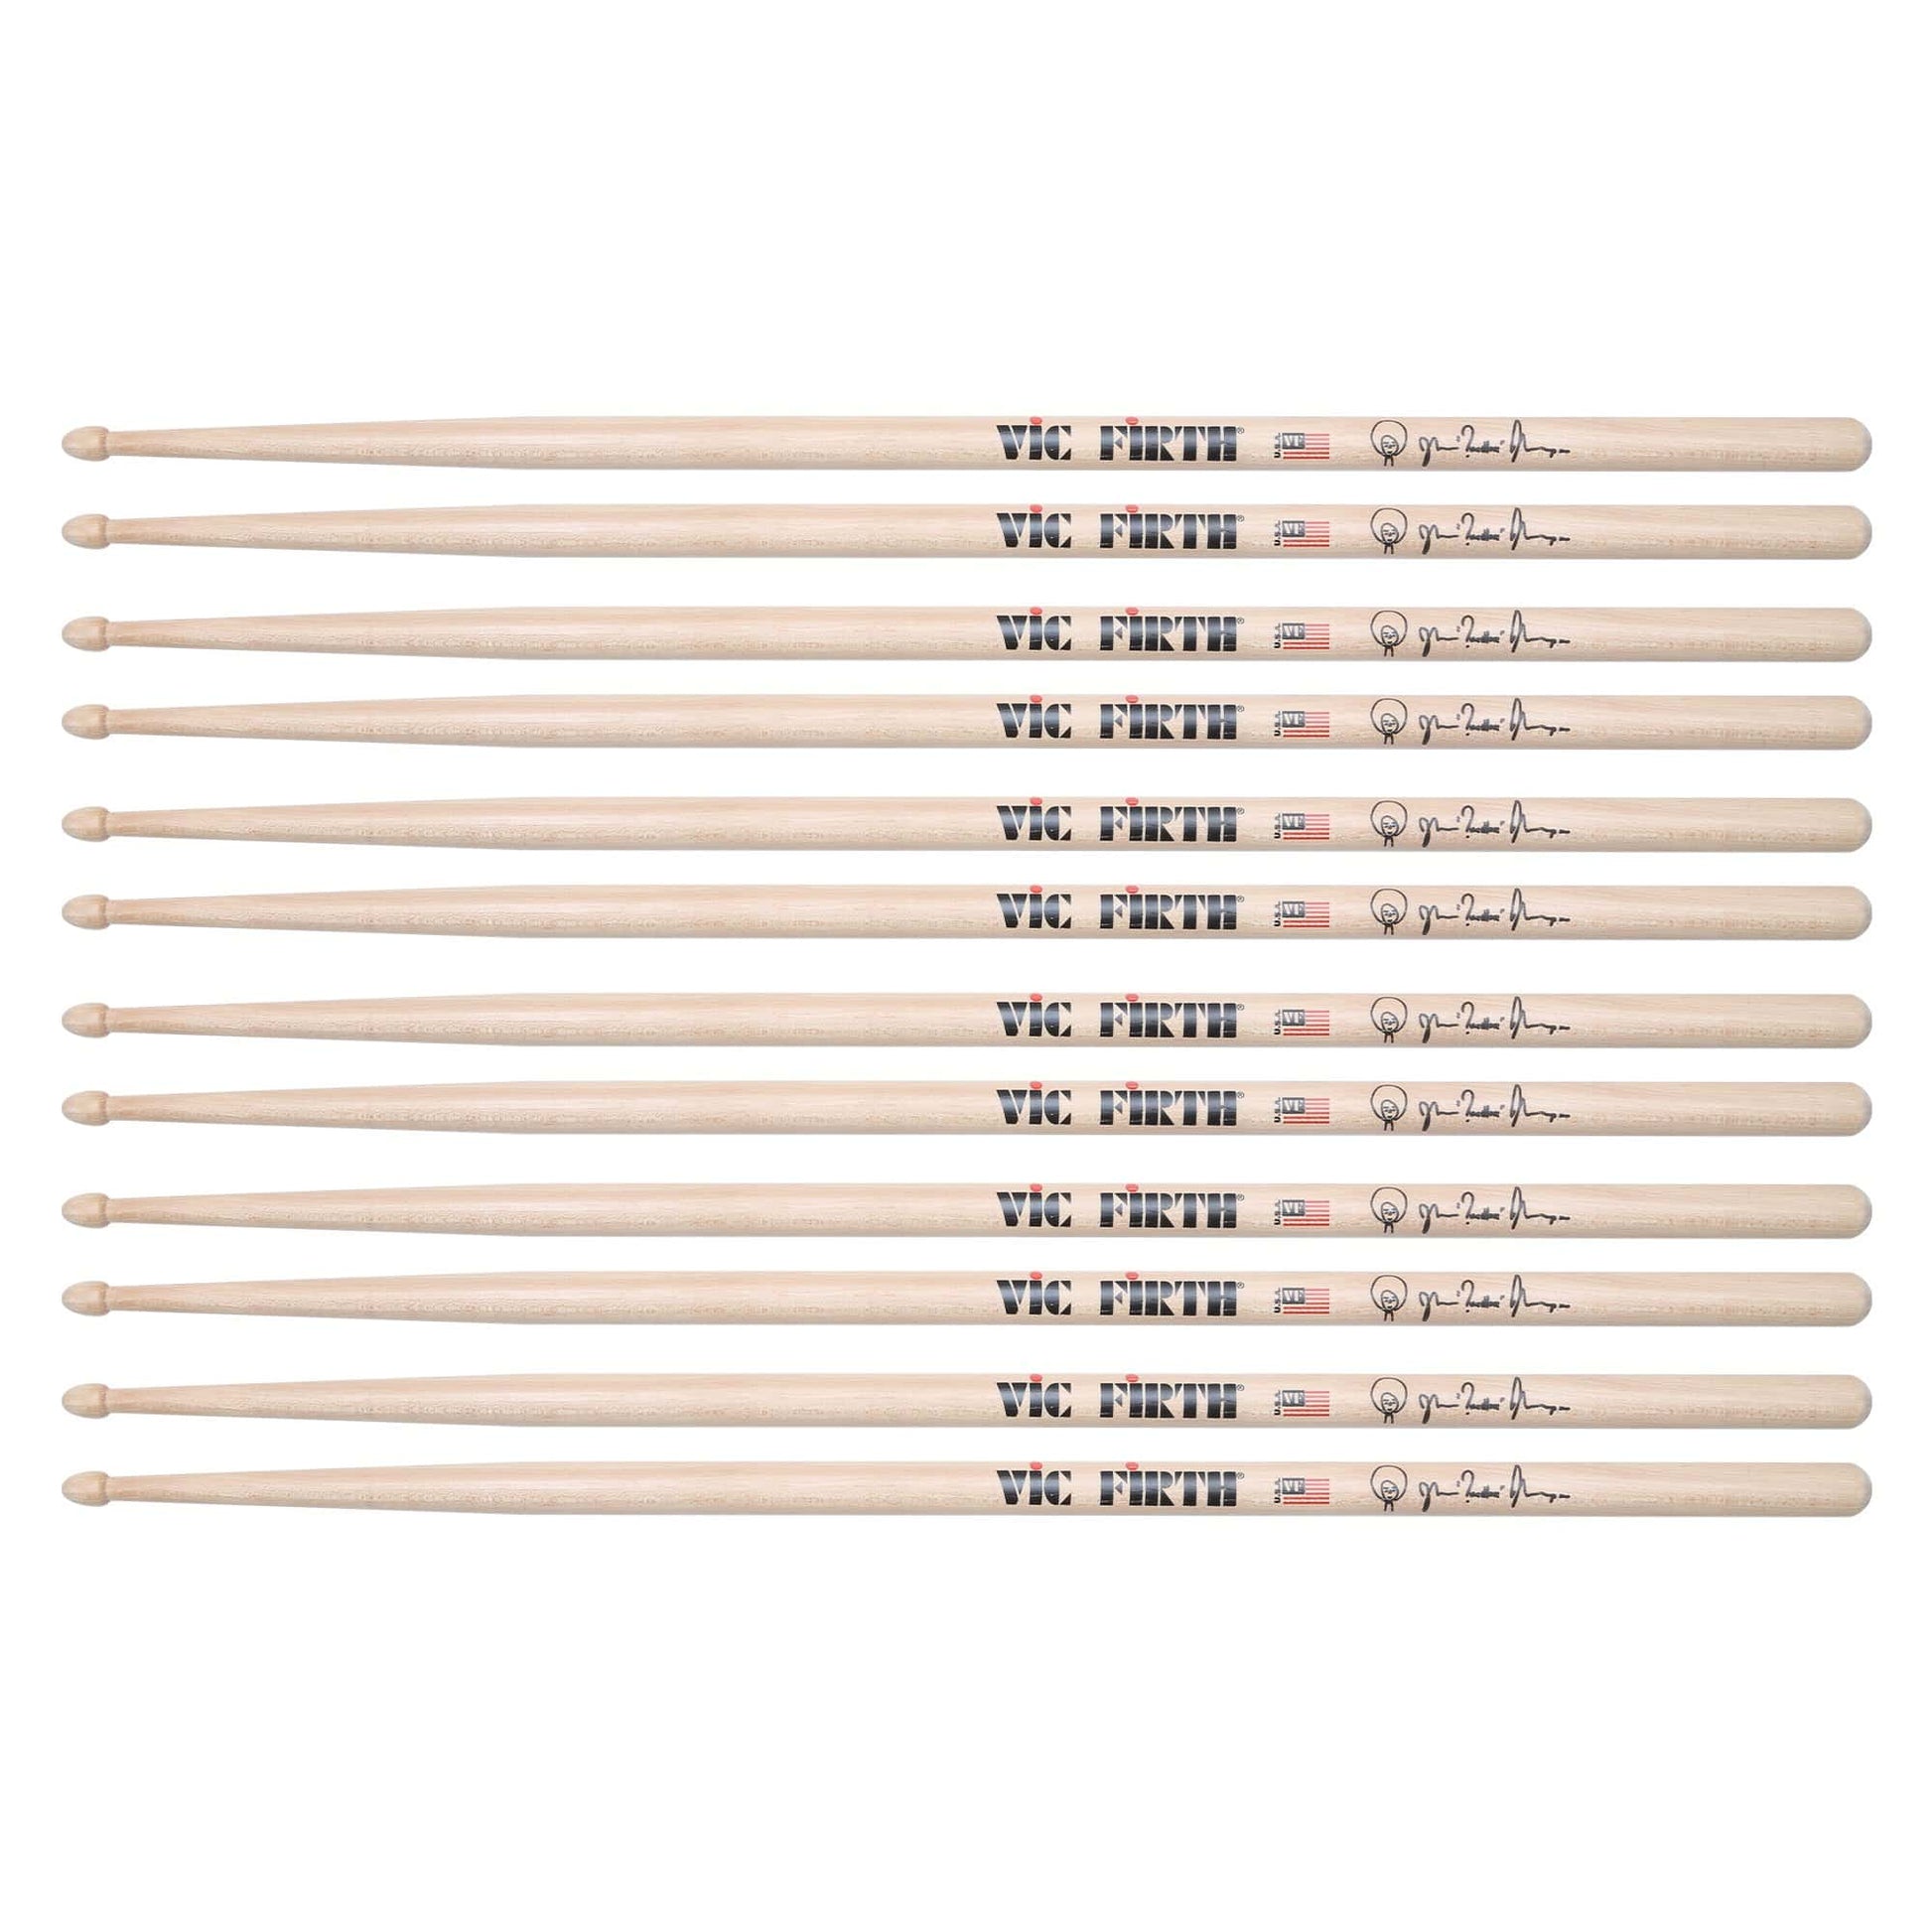 Vic Firth Questlove Natural Drum Sticks (6 Pair Bundle) Drums and Percussion / Parts and Accessories / Drum Sticks and Mallets